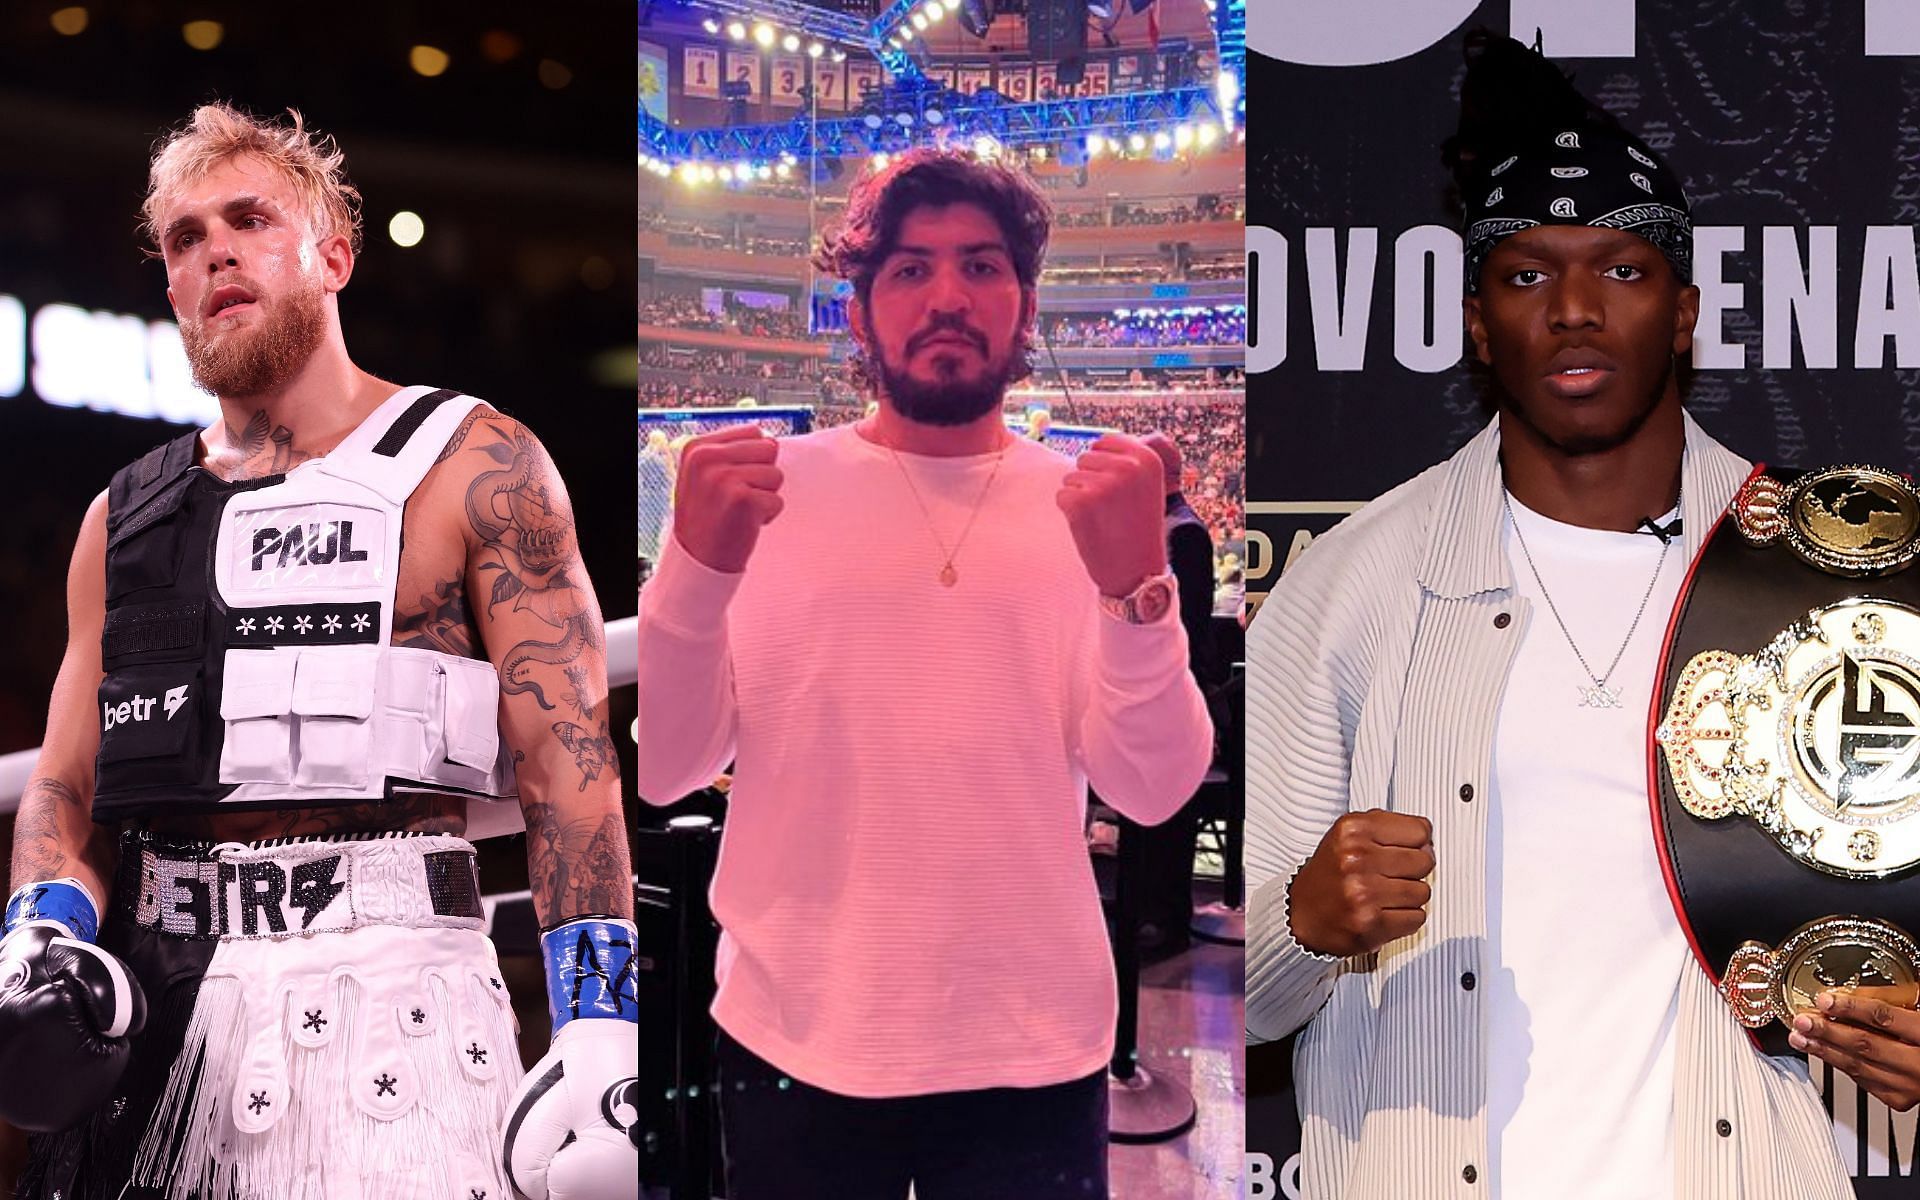 Jake Paul (left), Dillon Danis (center), and KSI (right) (Image credits Getty Images)